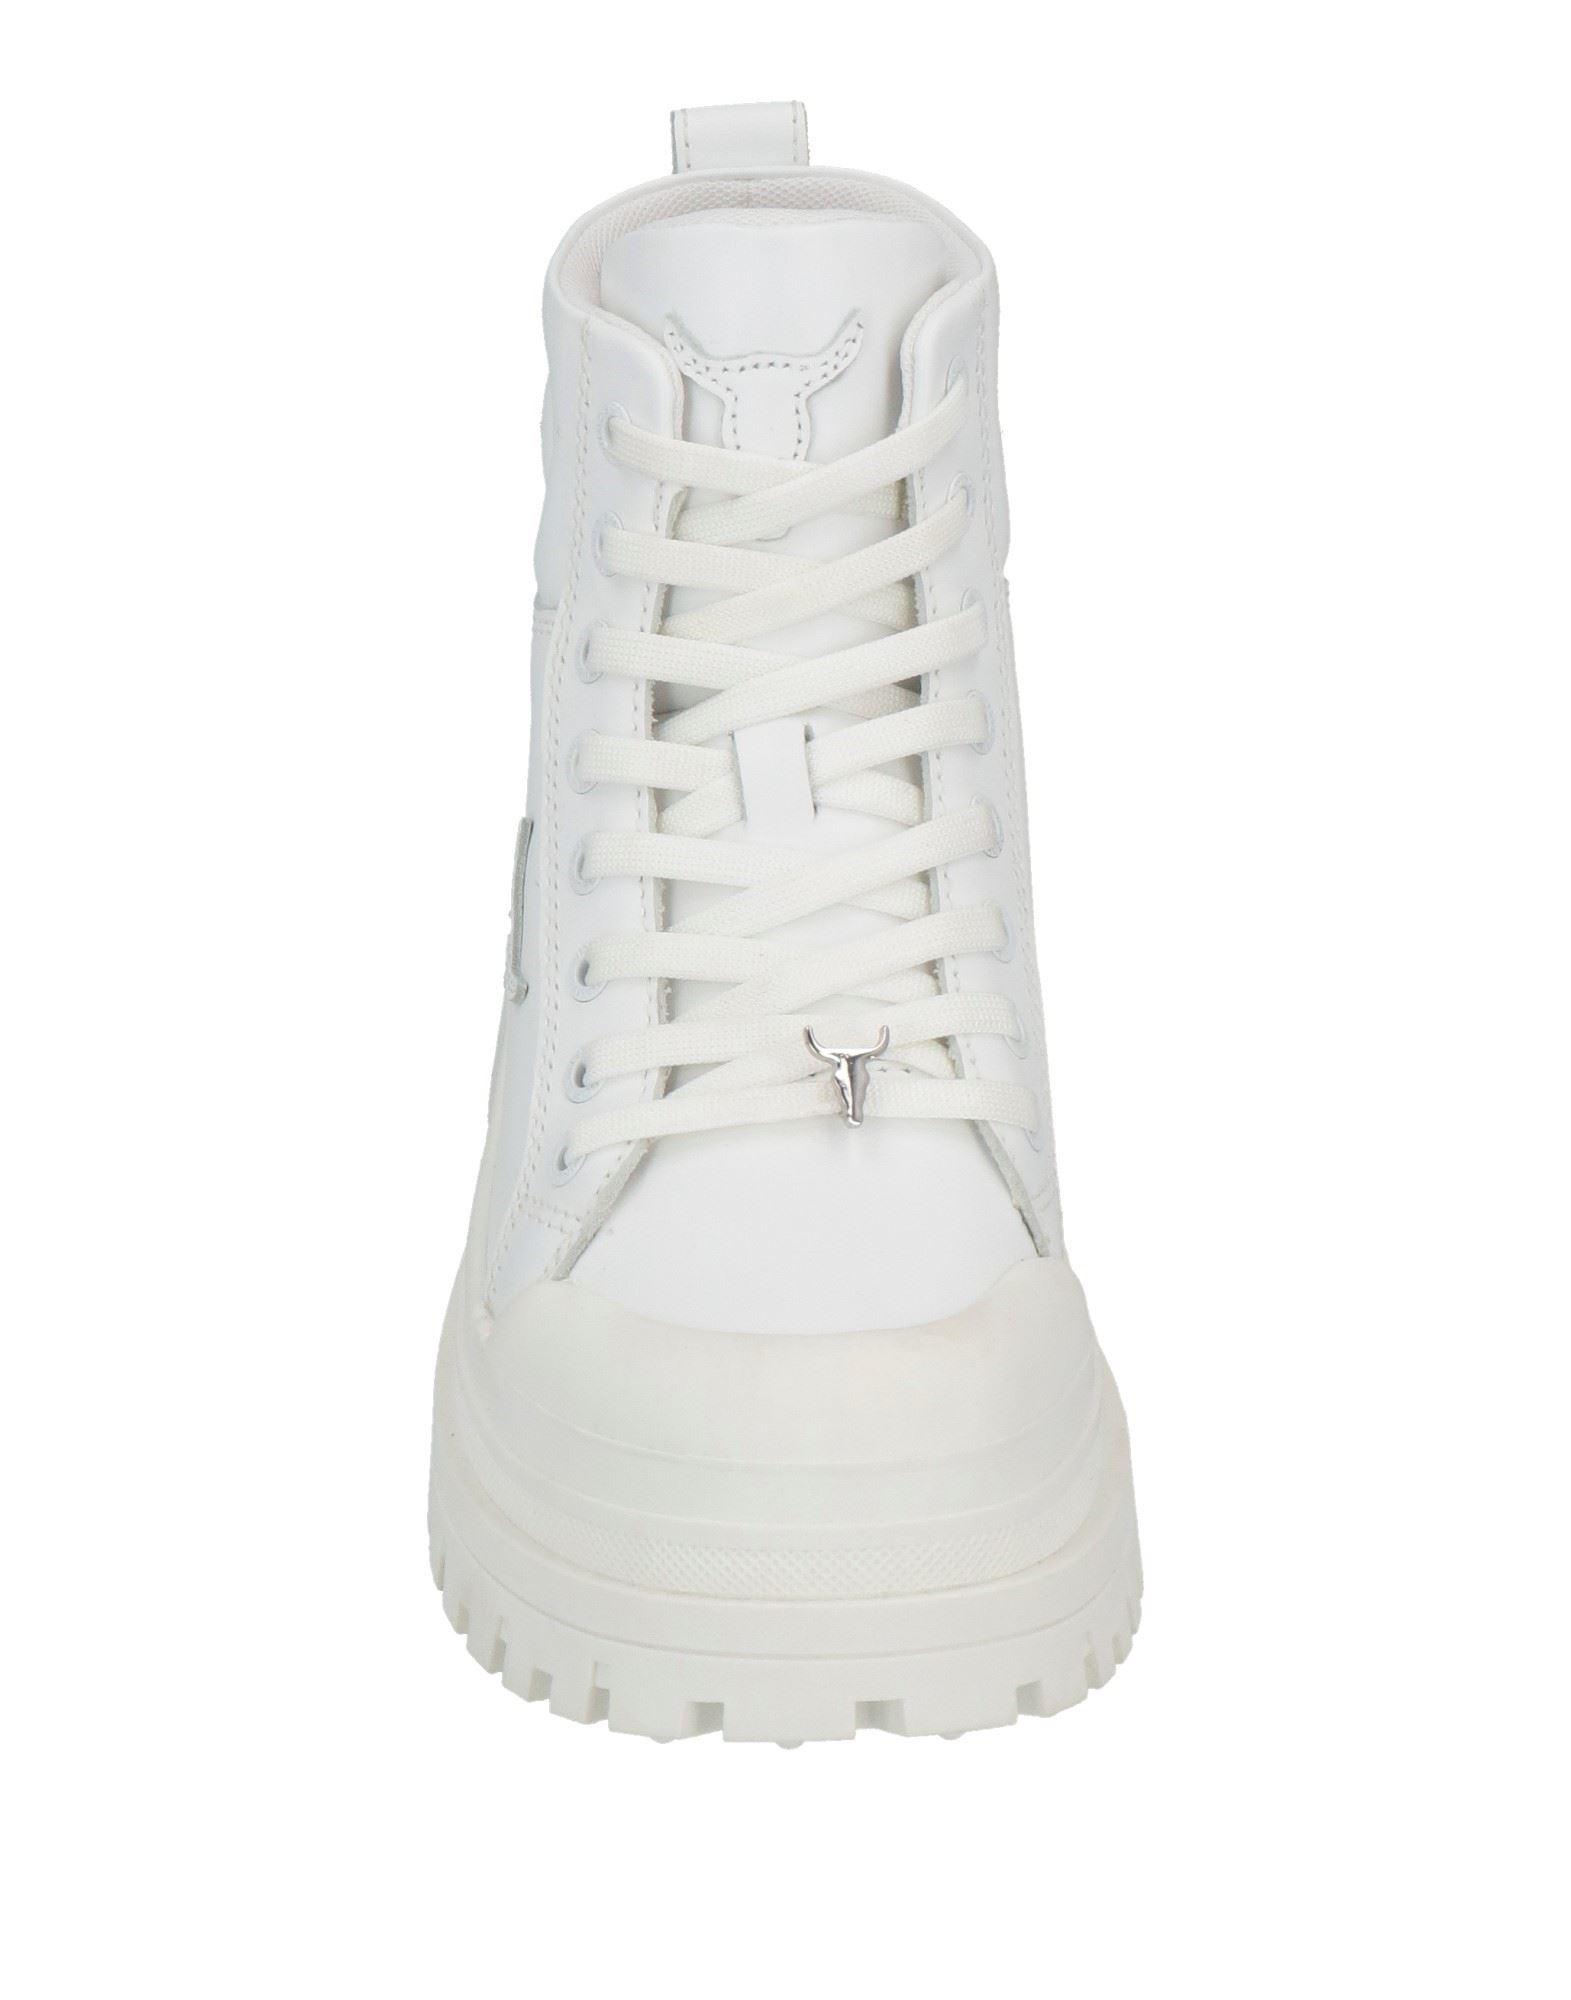 windsor smith White Ankle Boots